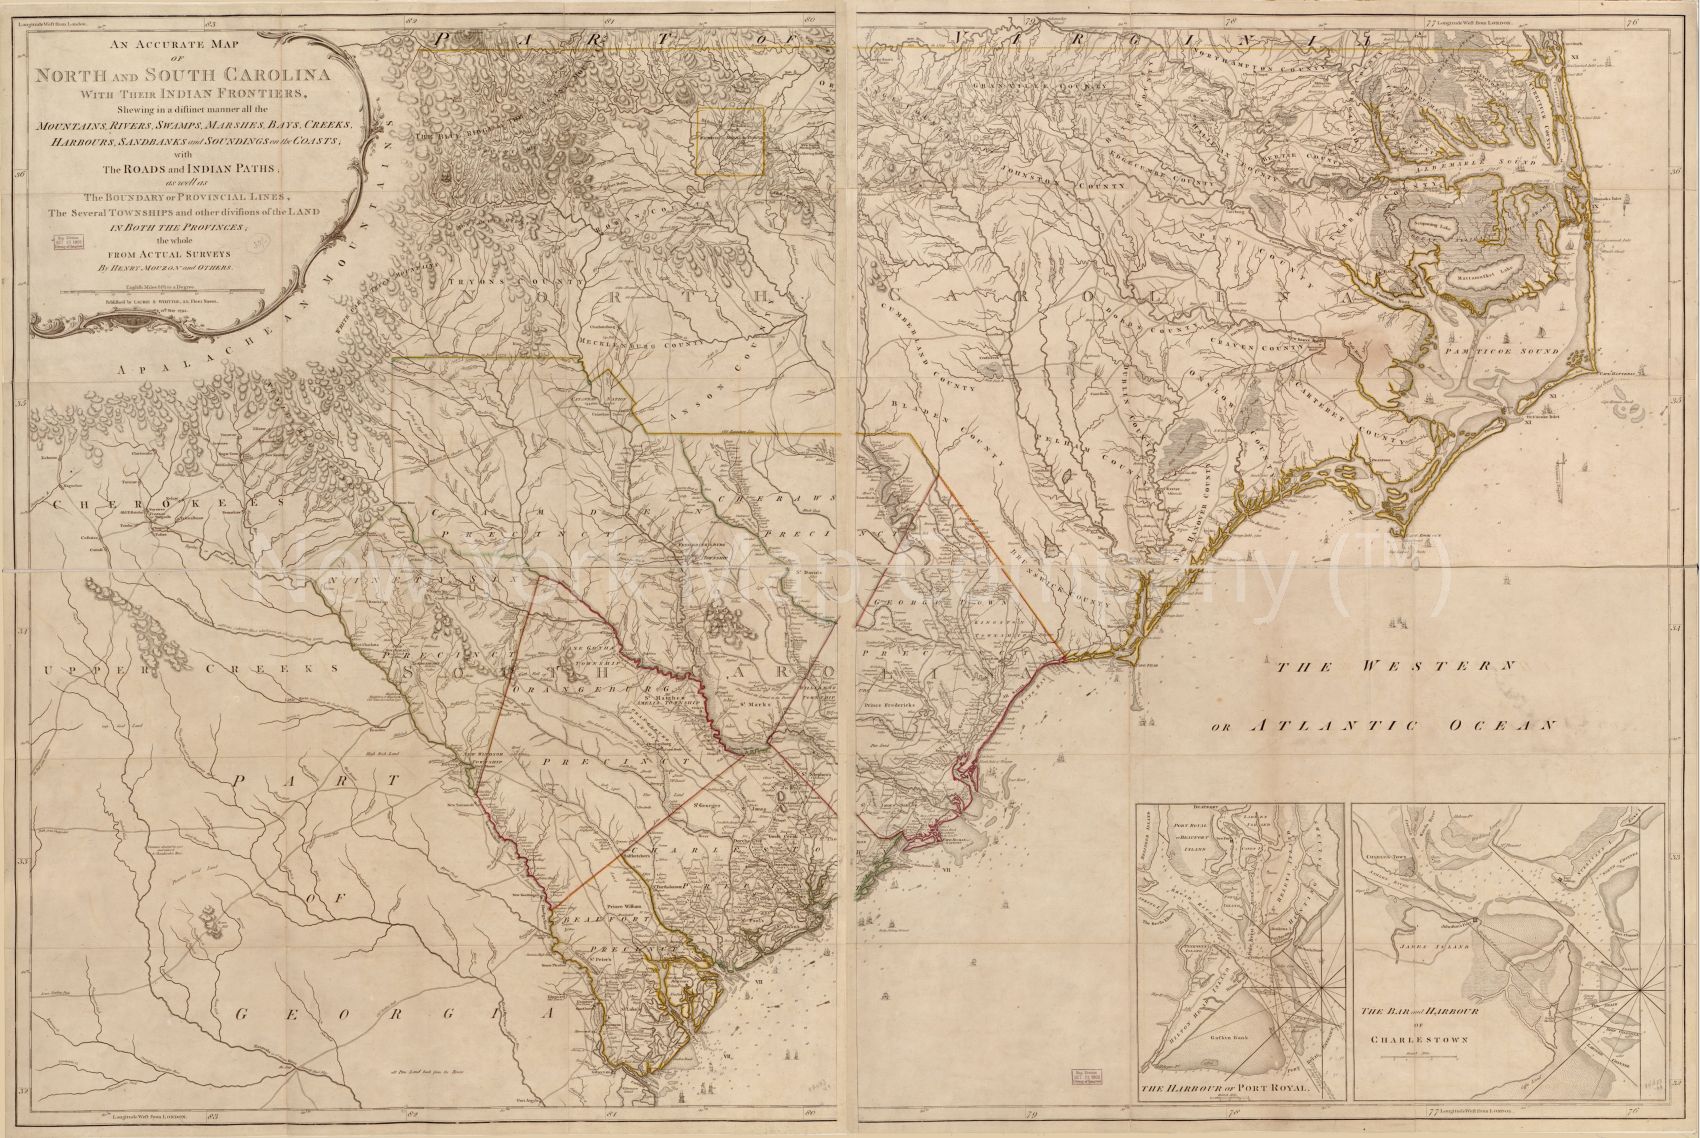 1794 map An accurate map of North and South Carolina with their Indian frontier, shewing in a distinct manner all the mountains, rivers, swamps, arshes, bays, creeks, harbours, sandbanks and soundings on the coasts with the roads and Indian paths as well